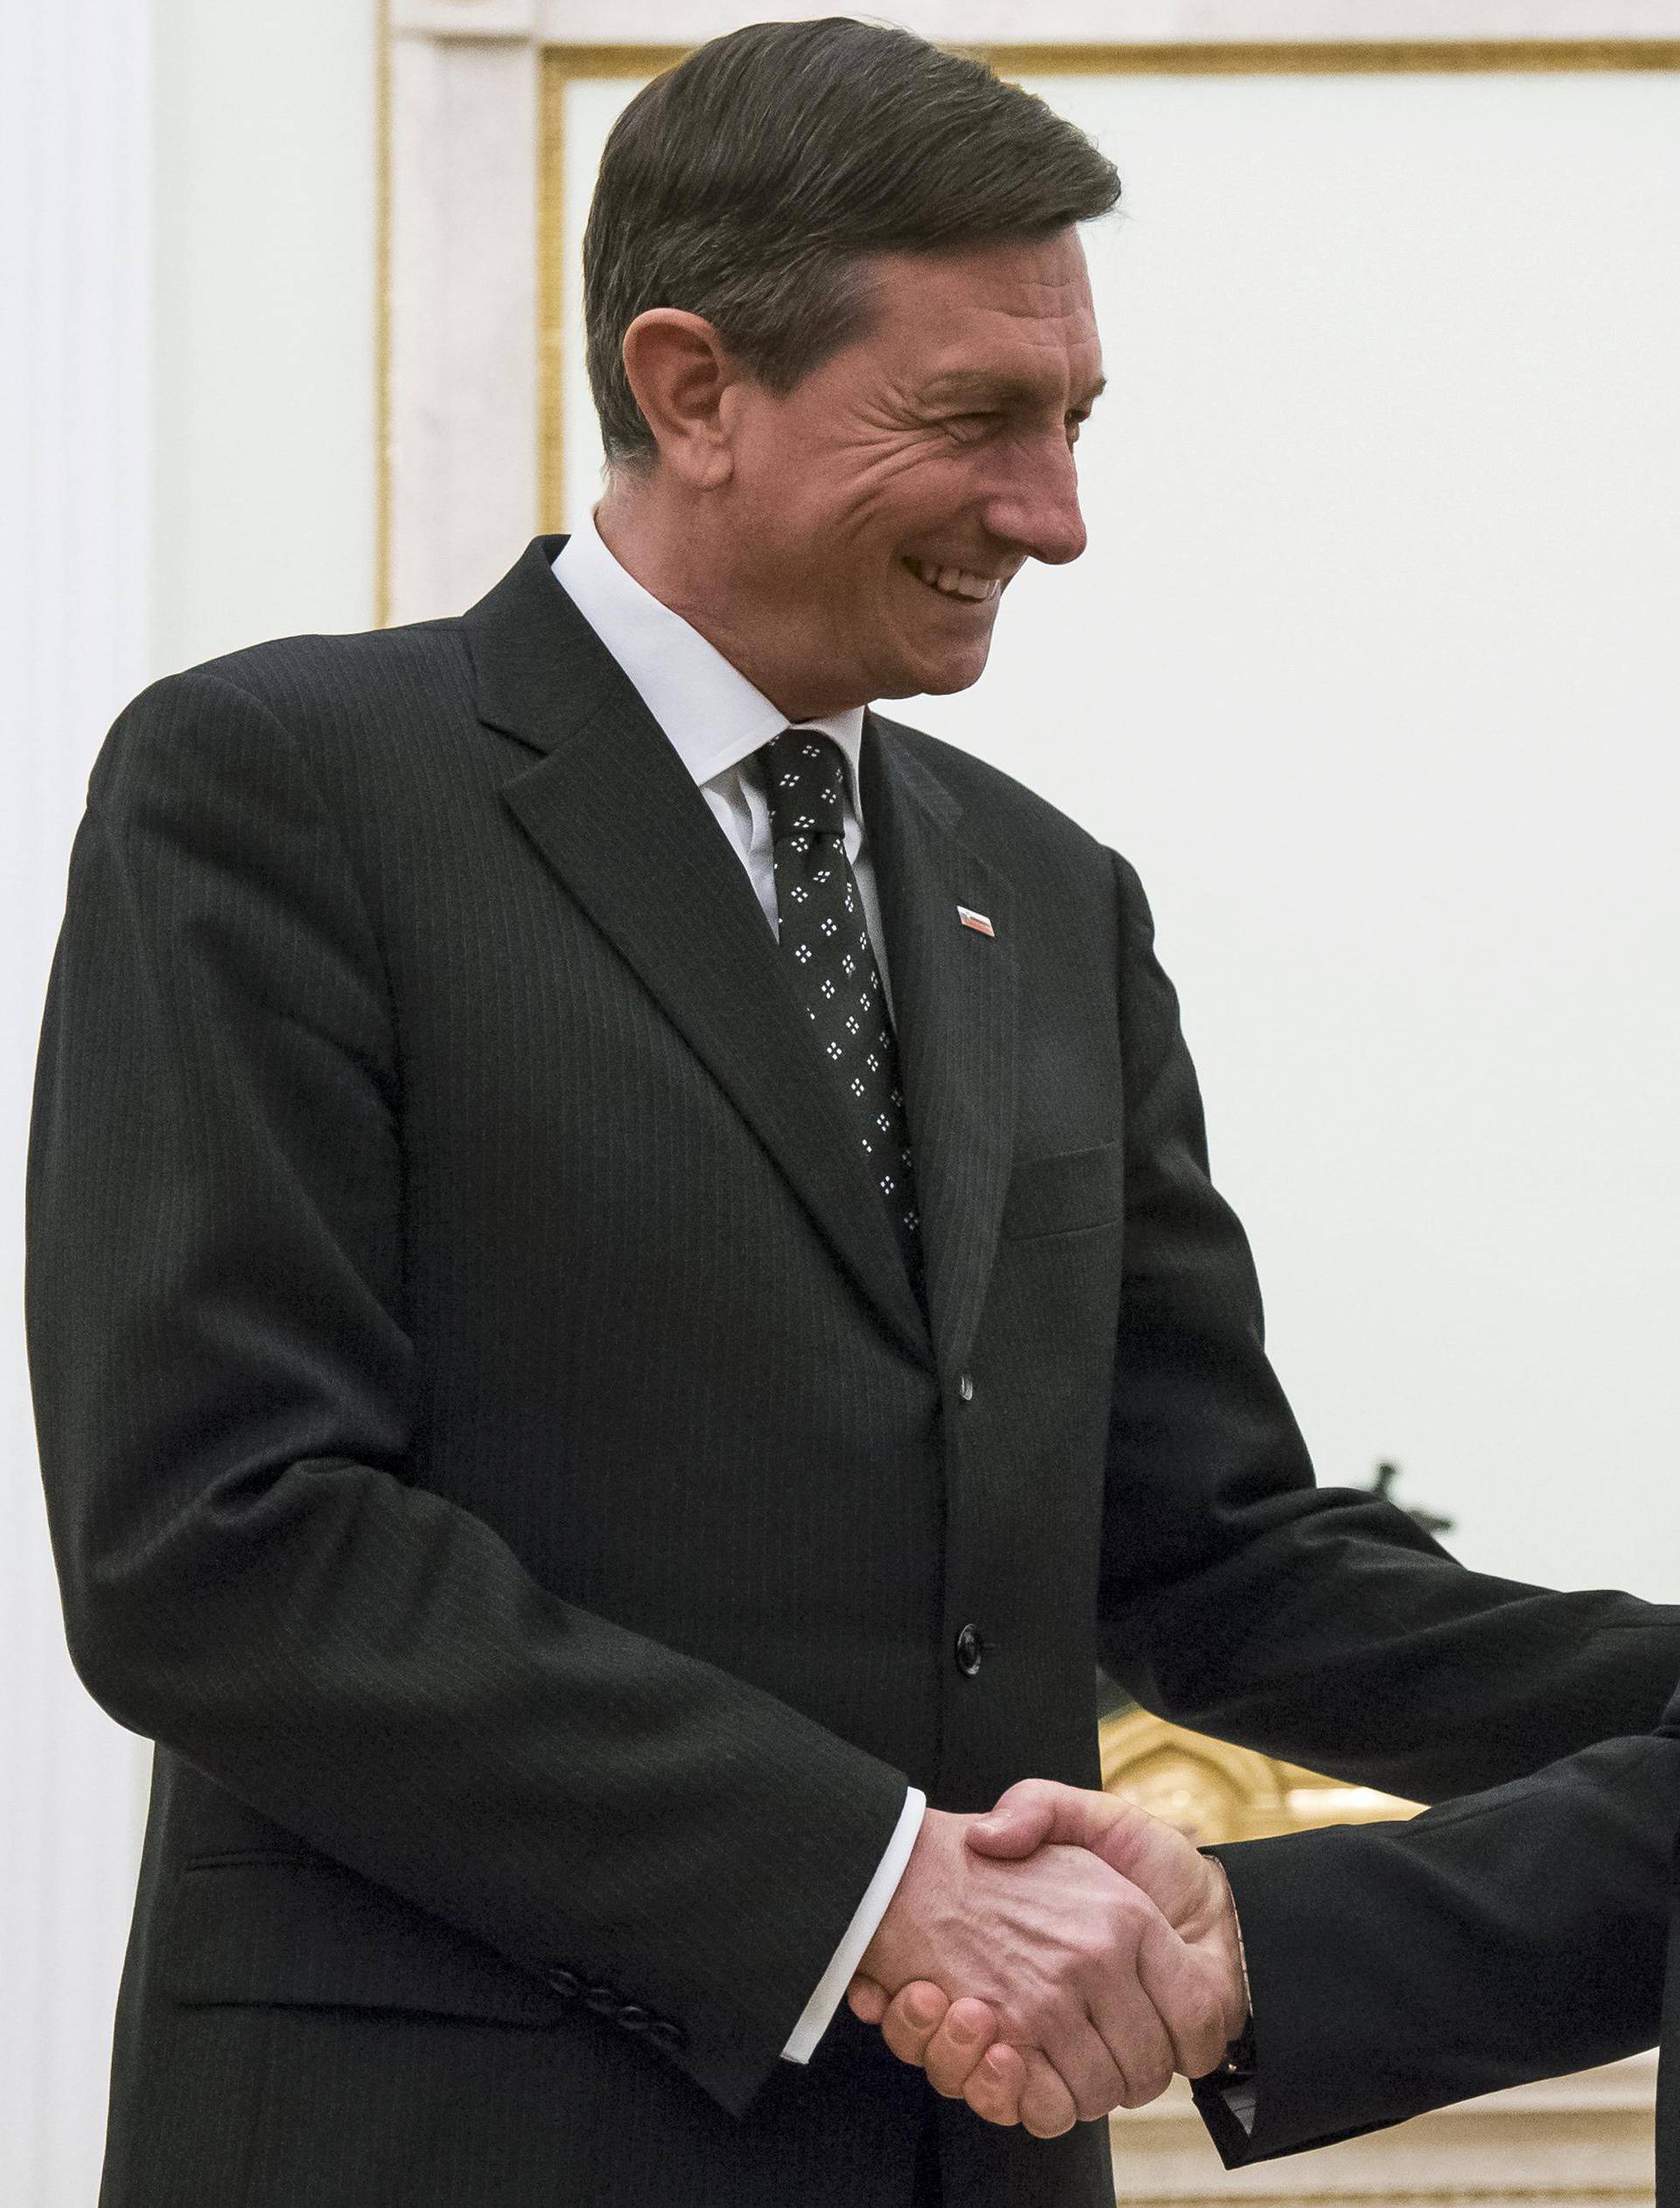 Russian President Putin meets his Slovenian counterpart Pahor in Moscow